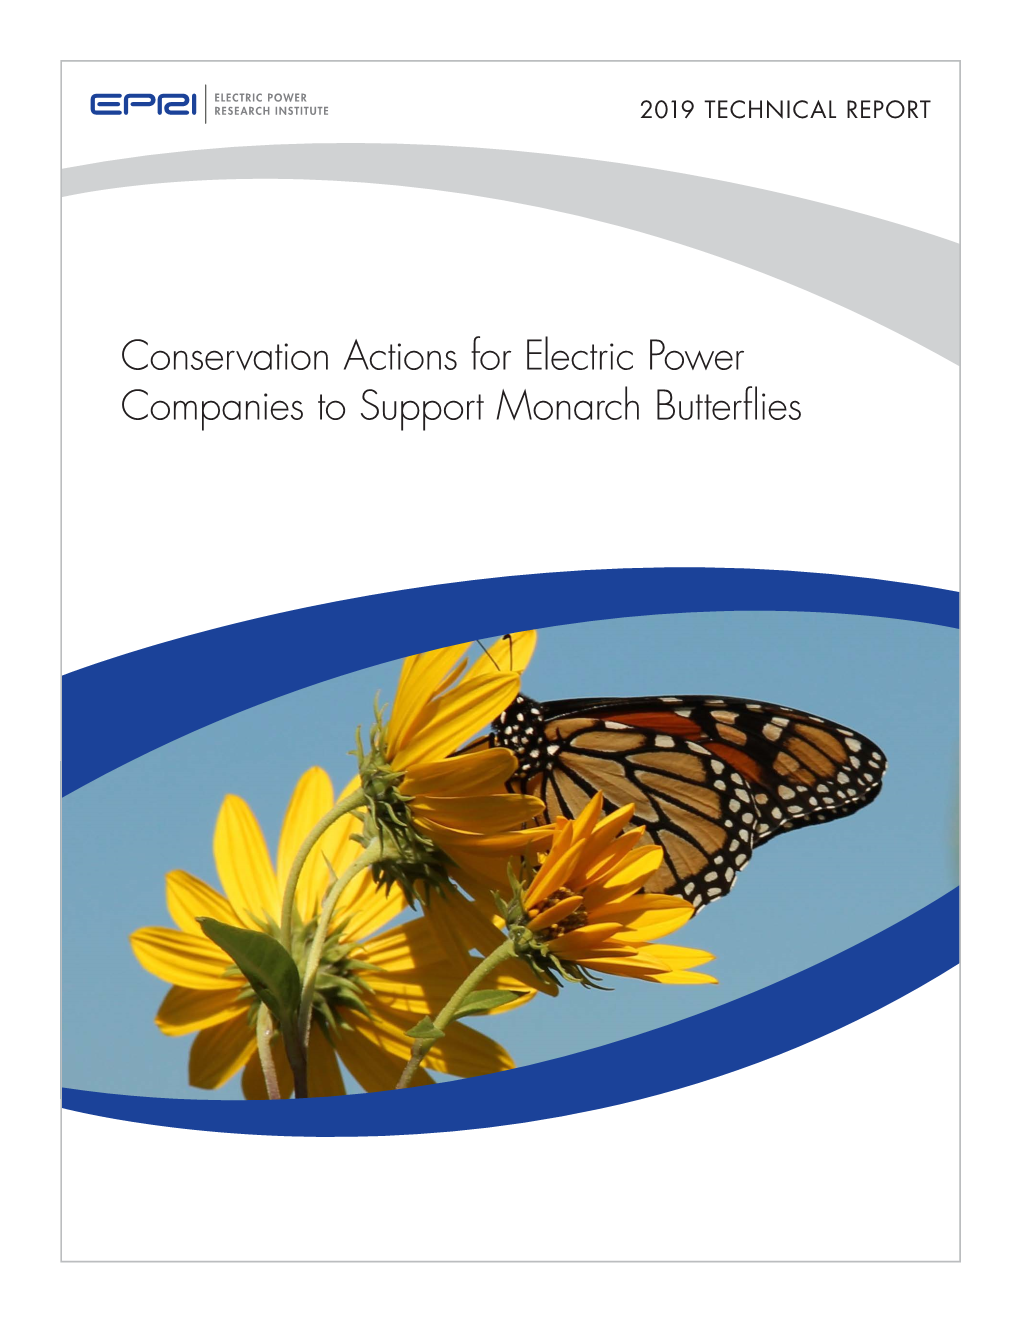 Conservation Actions for Electric Power Companies to Support Monarch Butterflies